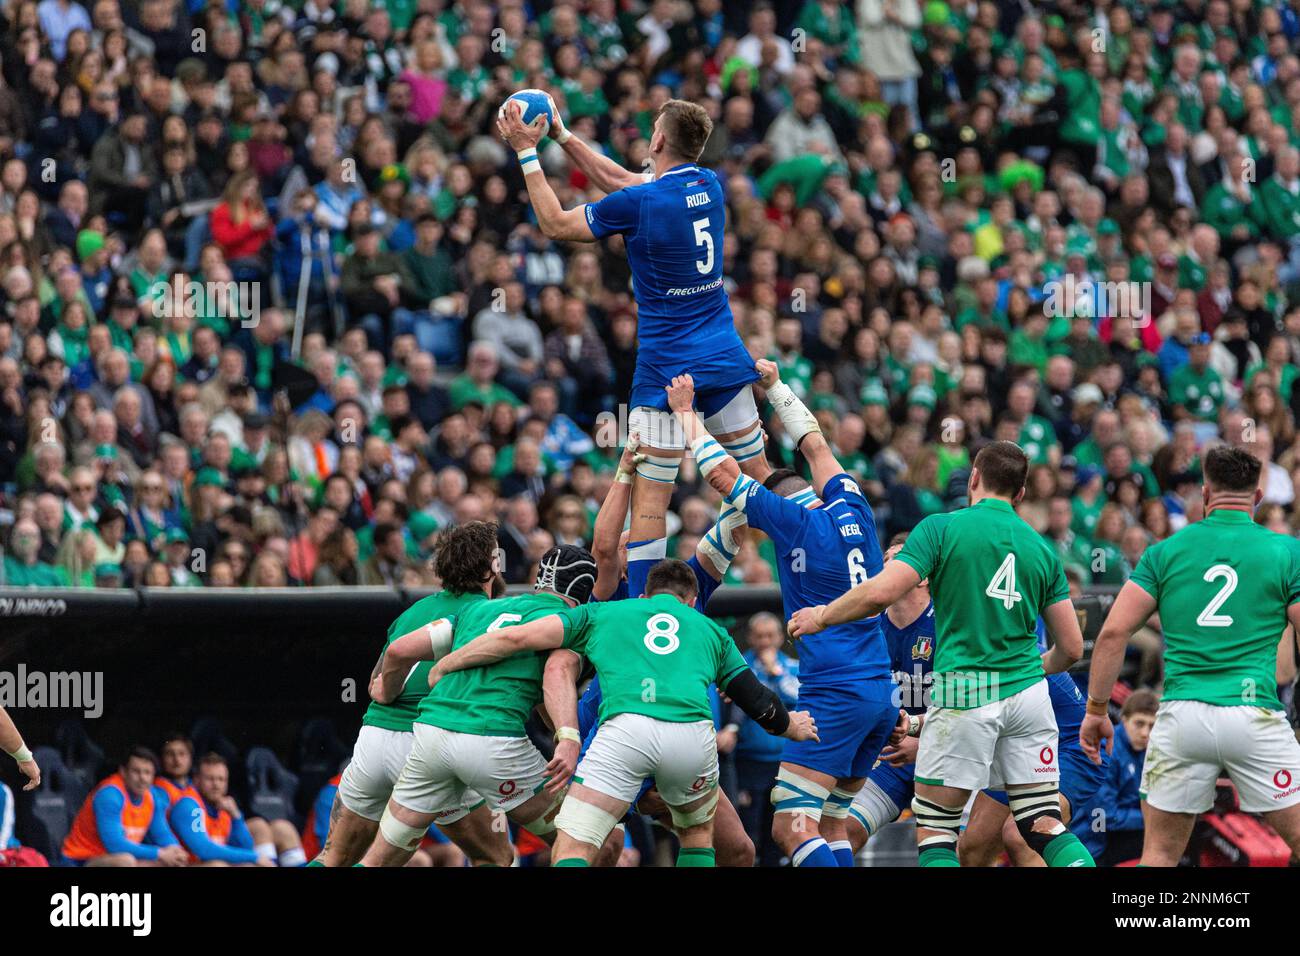 Rome, Italy. 25 Feb 2023. Federico Ruzza wins the ball in a line out during the first half. Italy vs Ireland, Six Nations Rugby. Stadio Olimpico. Rome, Italy. 25 Feb 2023. Stock Photo